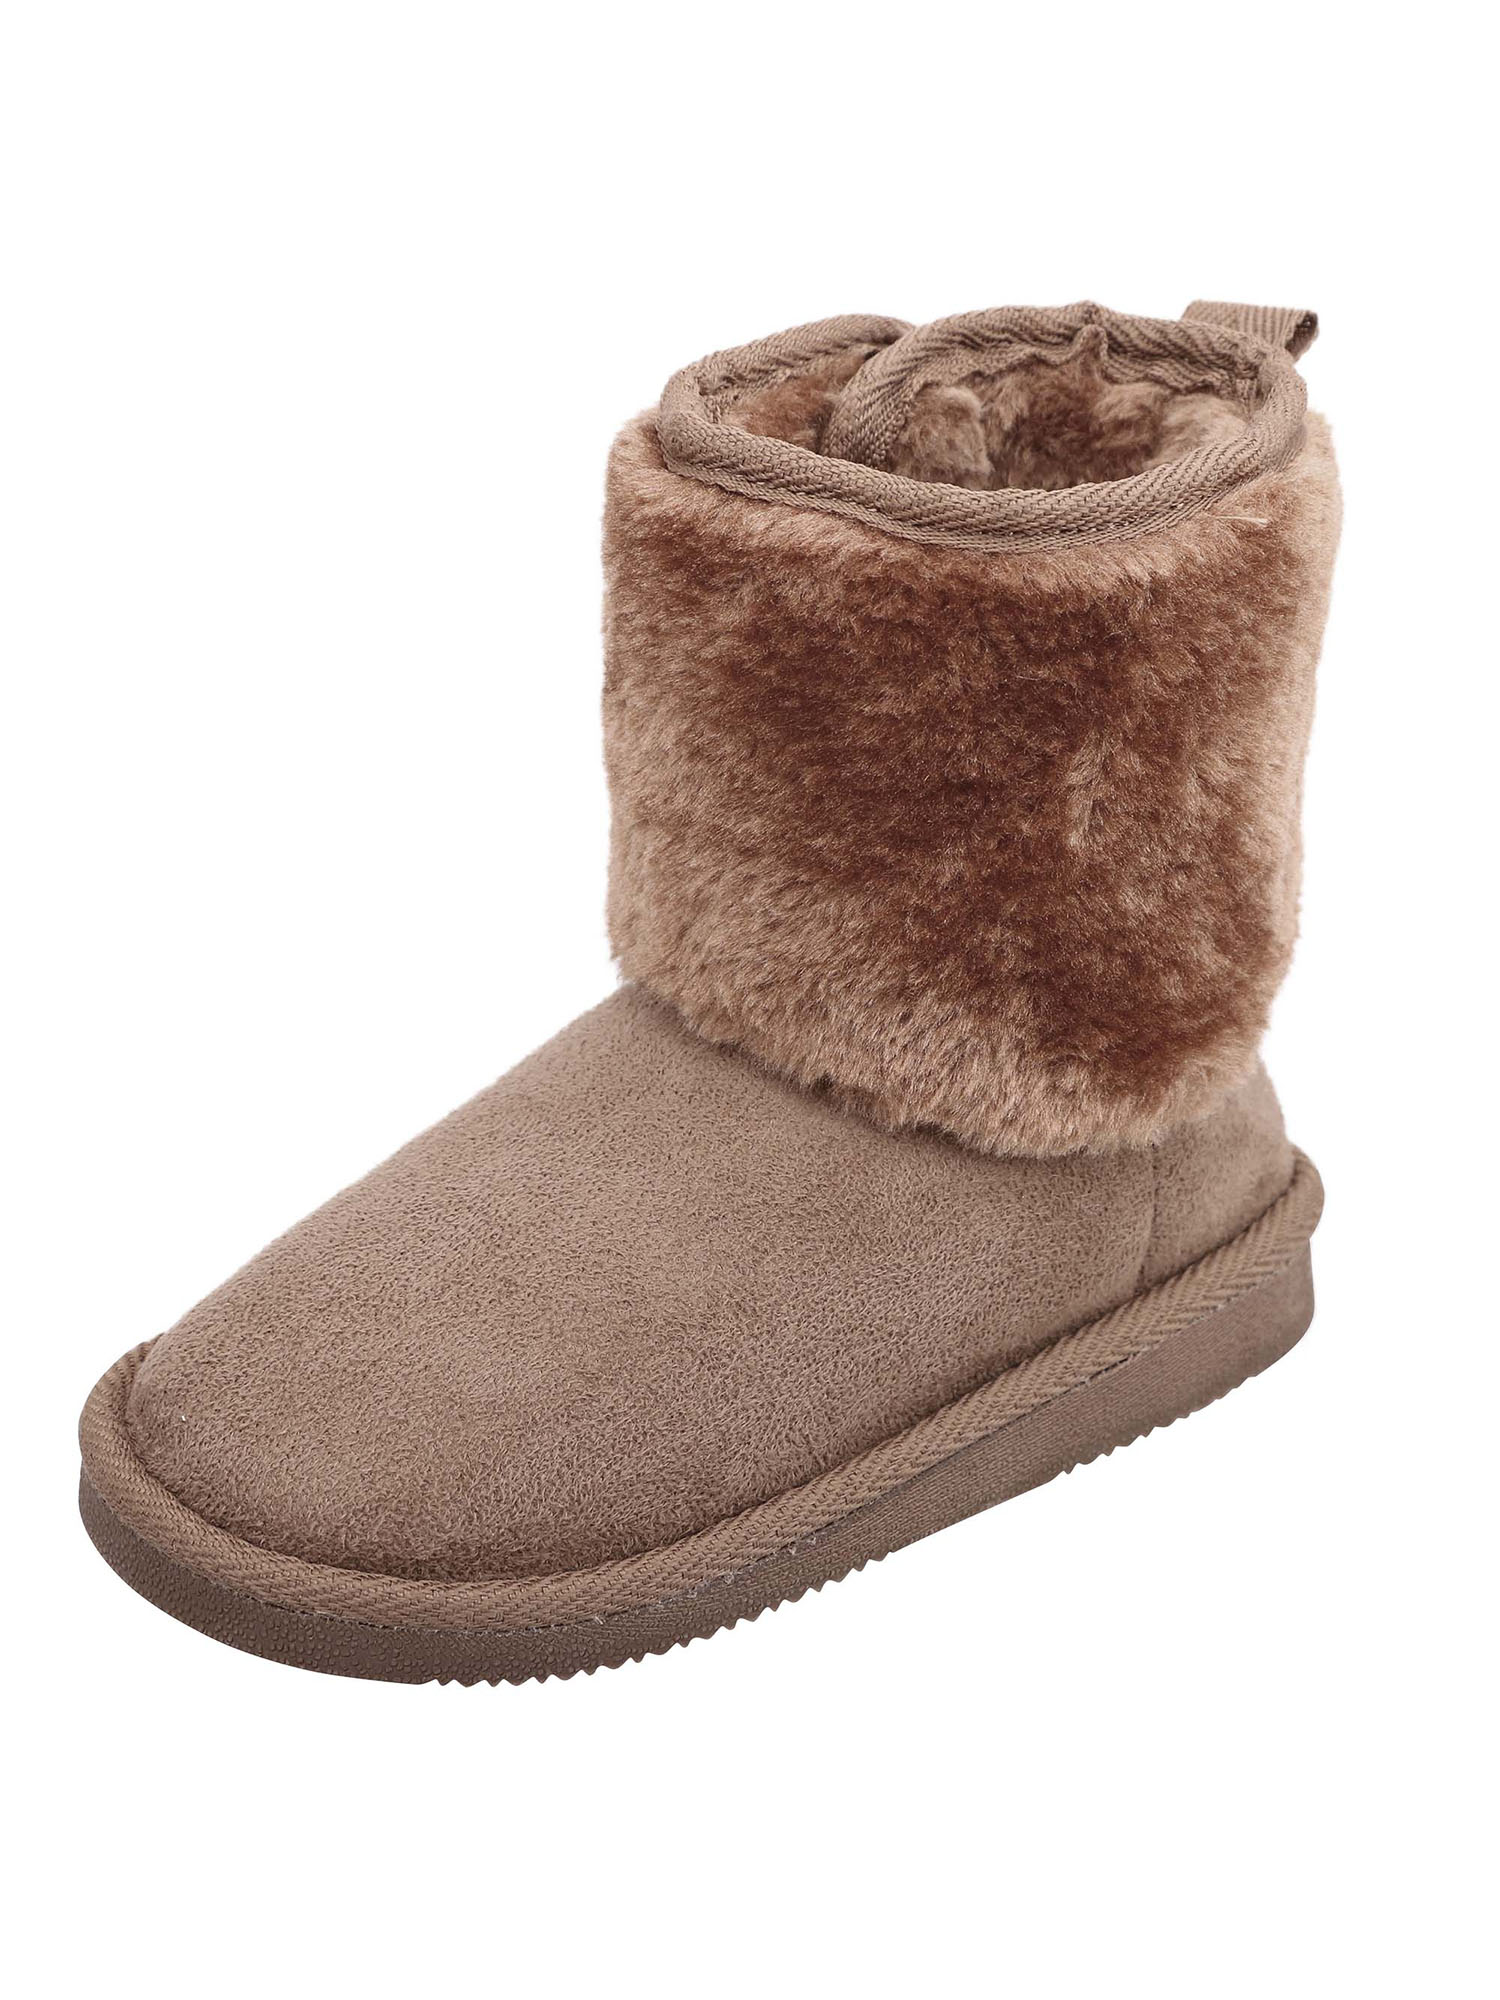 Compatible for Kids Snow Boots Sherpa Lined Winter Boots Camel 12 - image 1 of 3